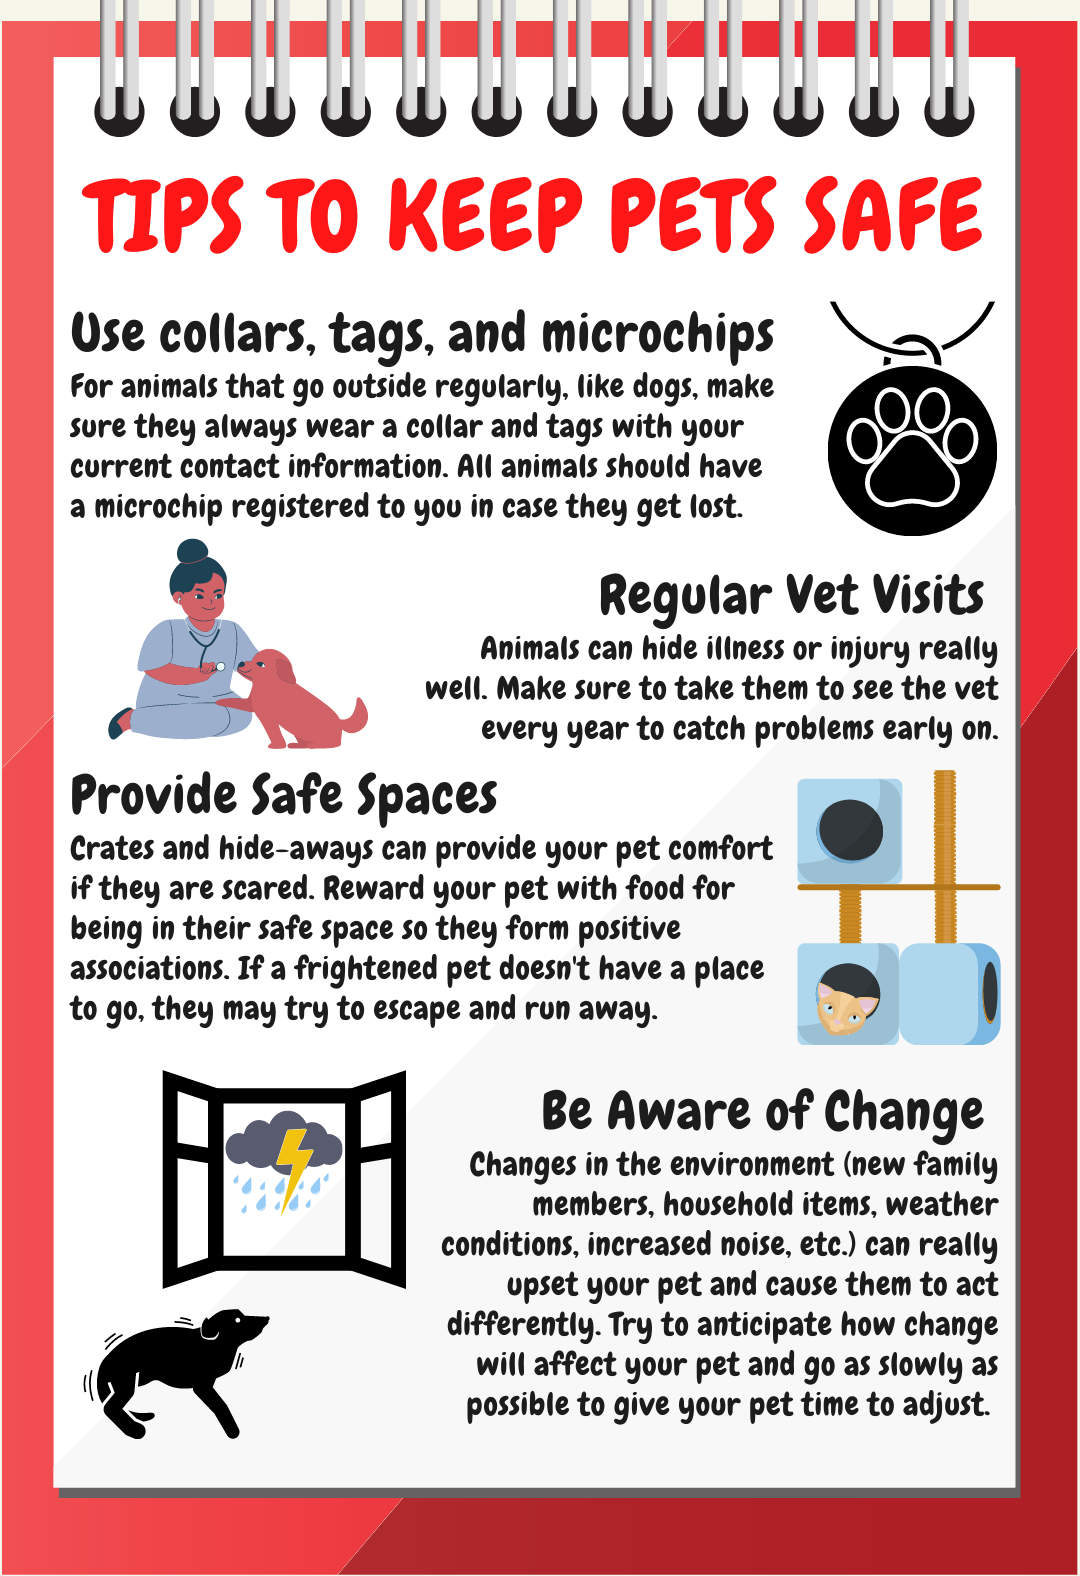 Tips to Keep Pets Safe